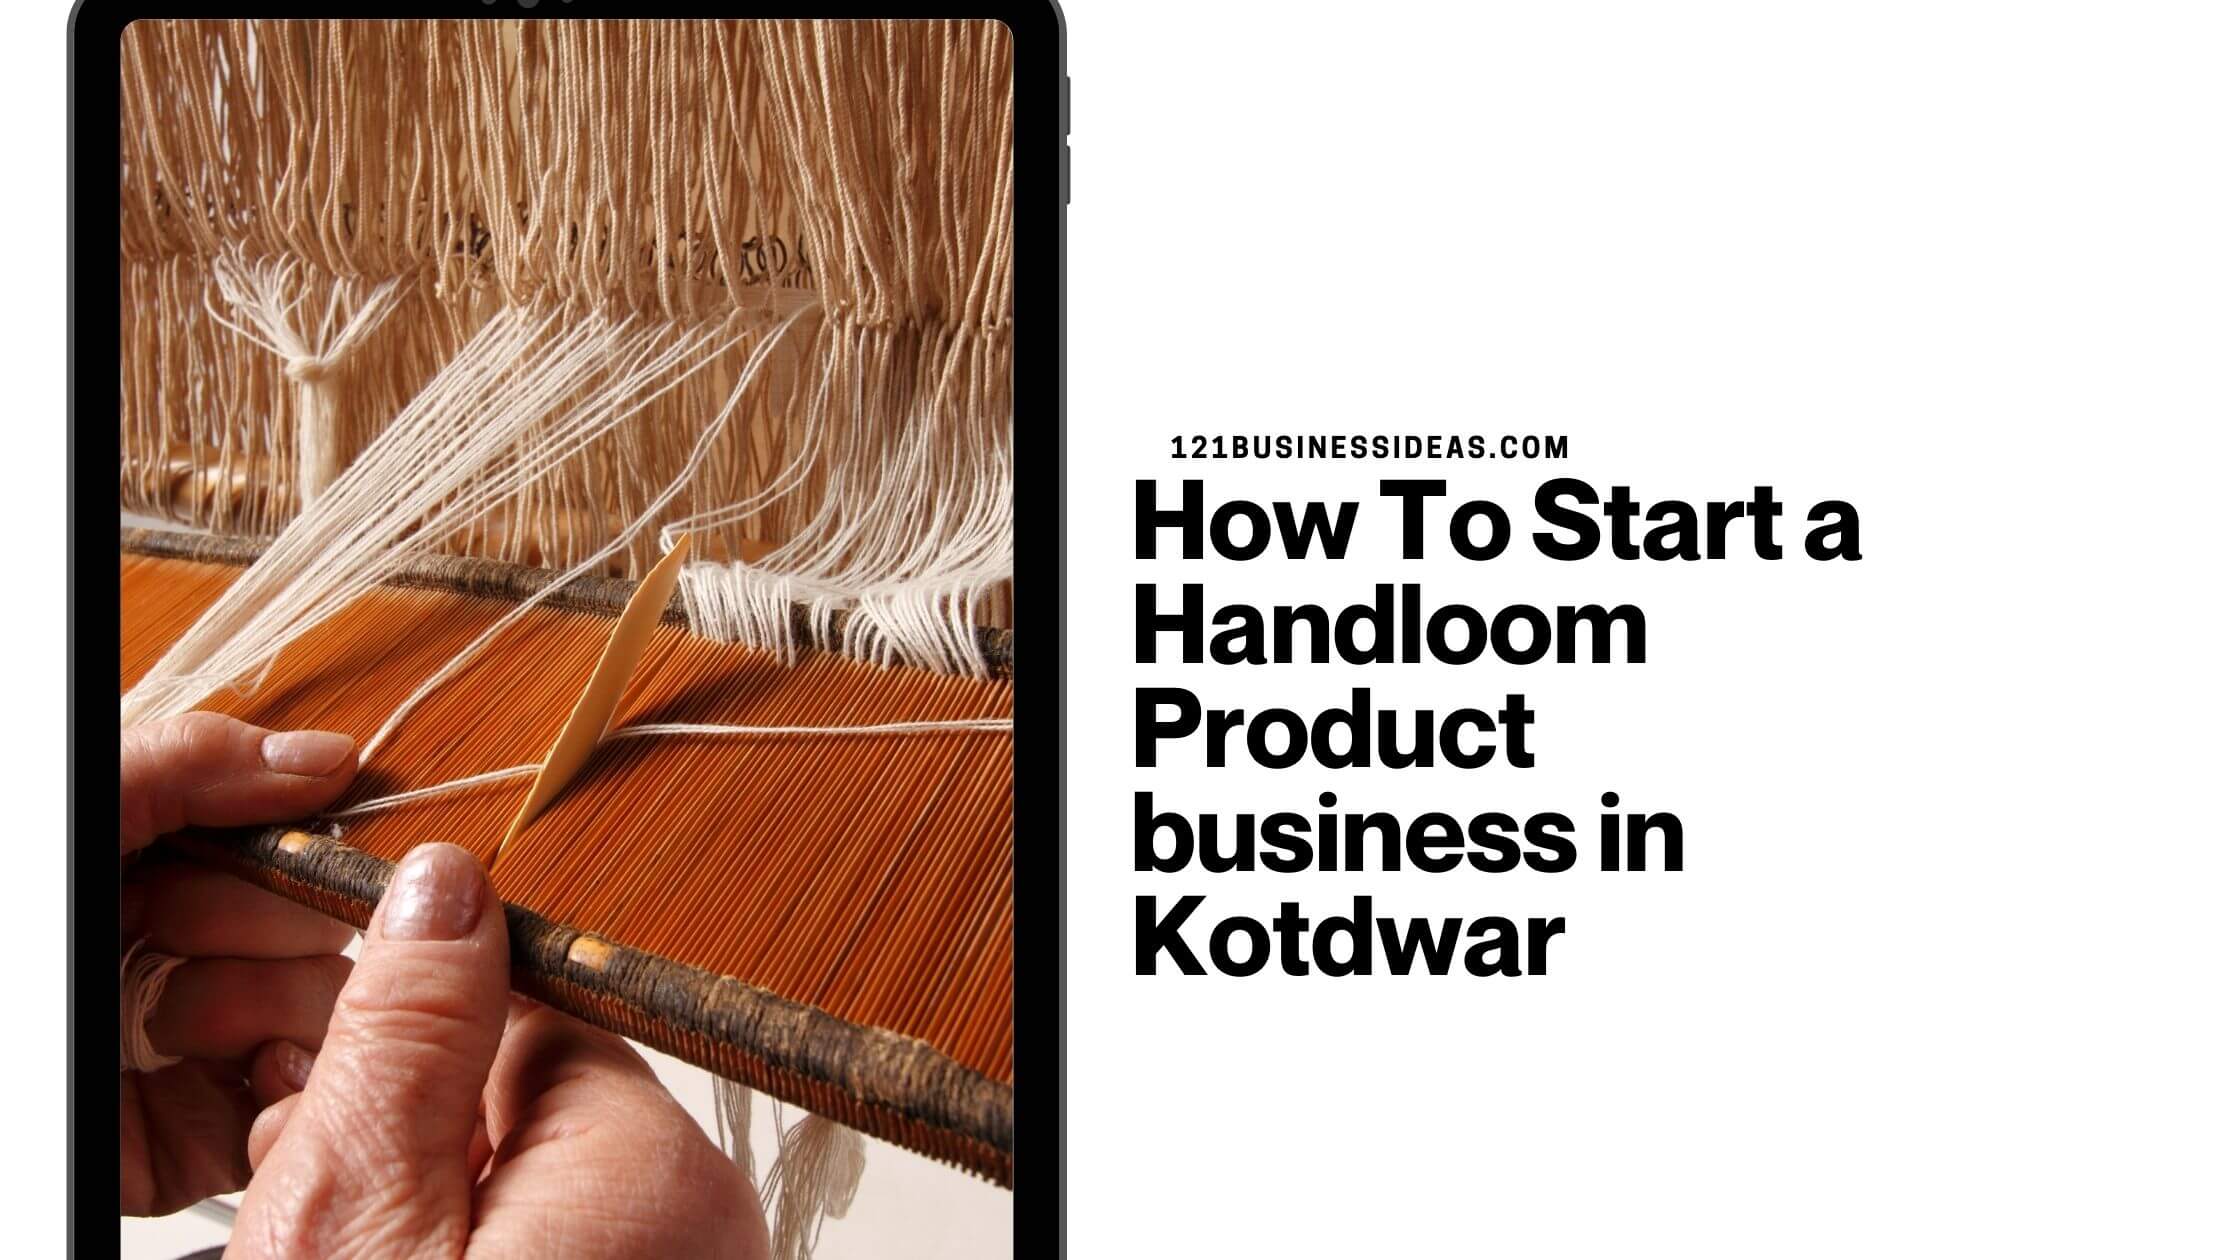 How To Start a Handloom Product business in Kotdwar (1)